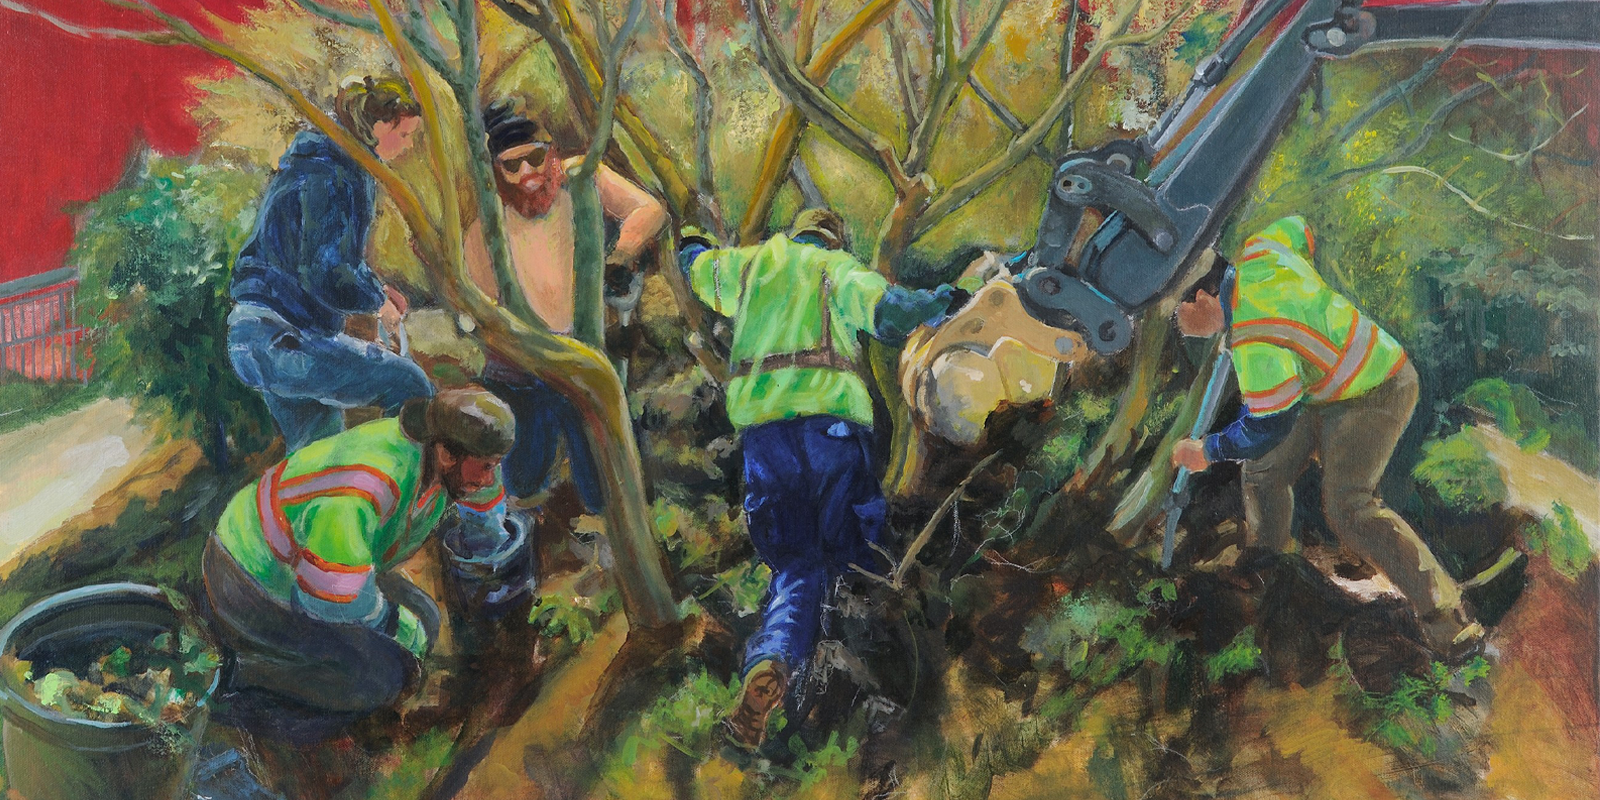 A Maryland artist spotlighted AFSCME members’ dedication and strength.